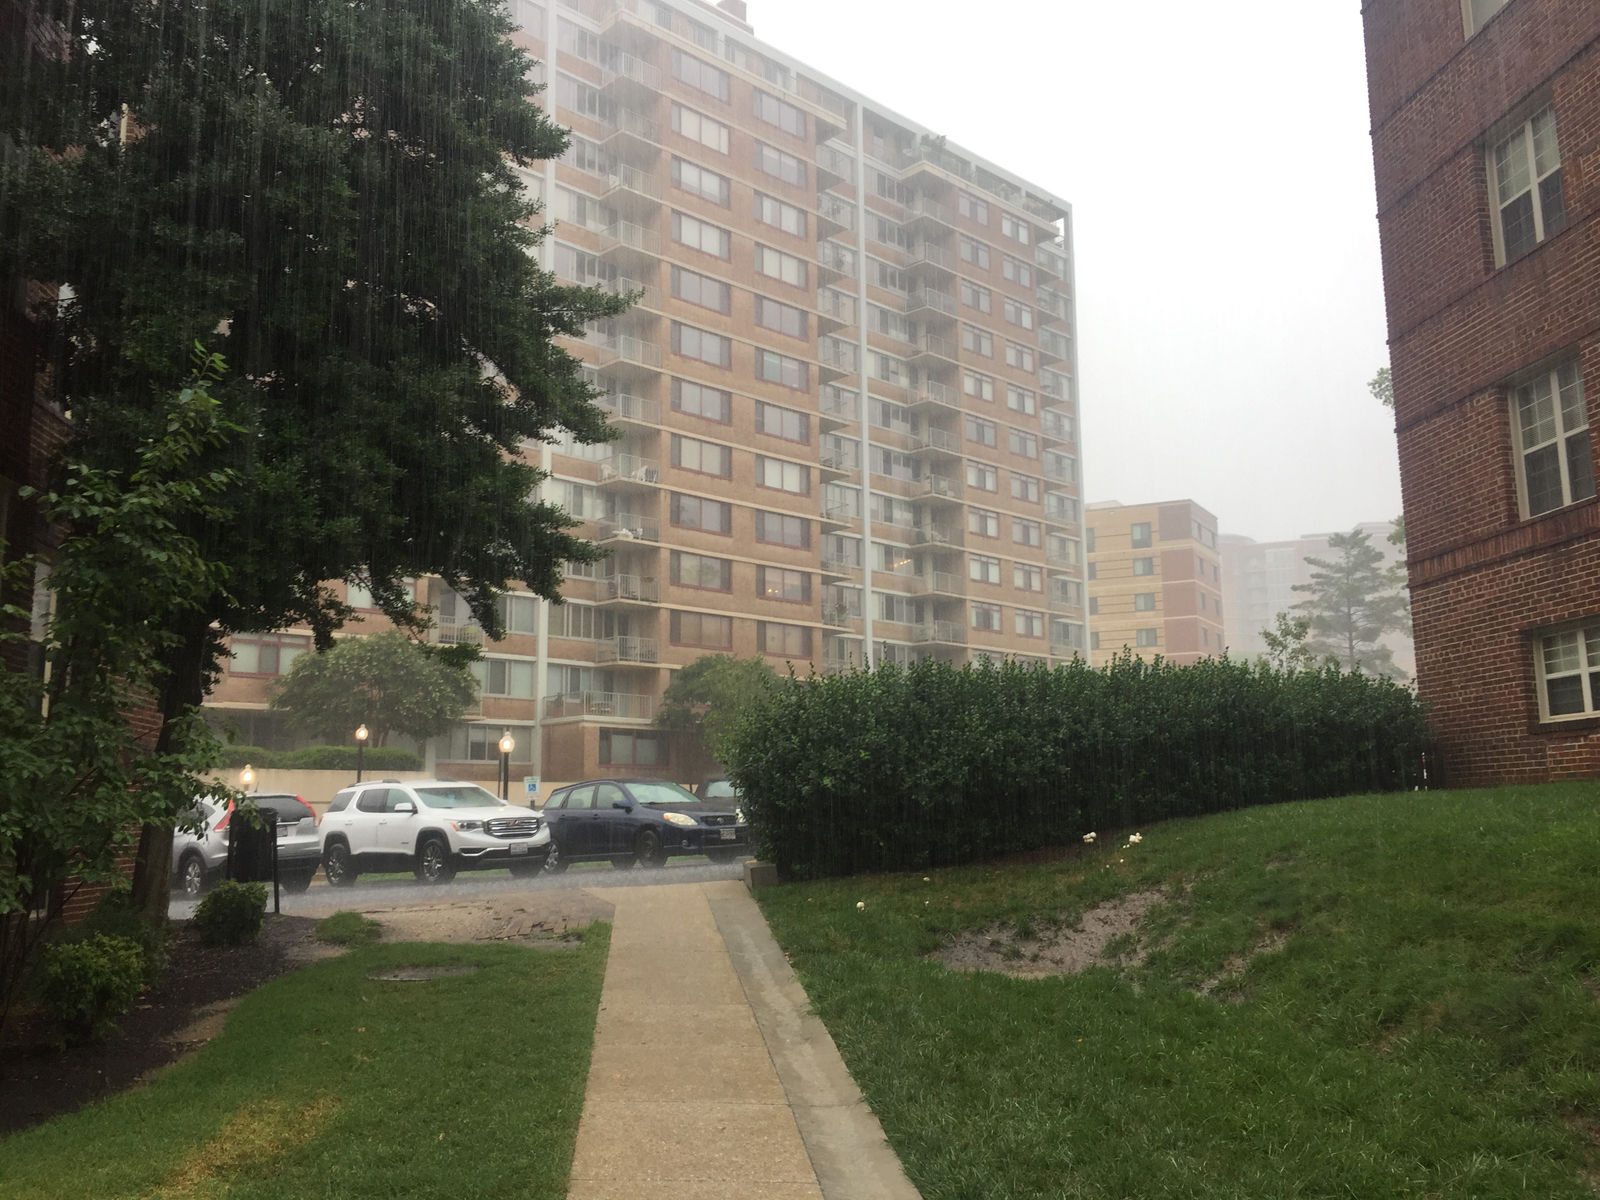 Rain comes down in downtown Silver Spring, Maryland. (WTOP/Patrick Roth)